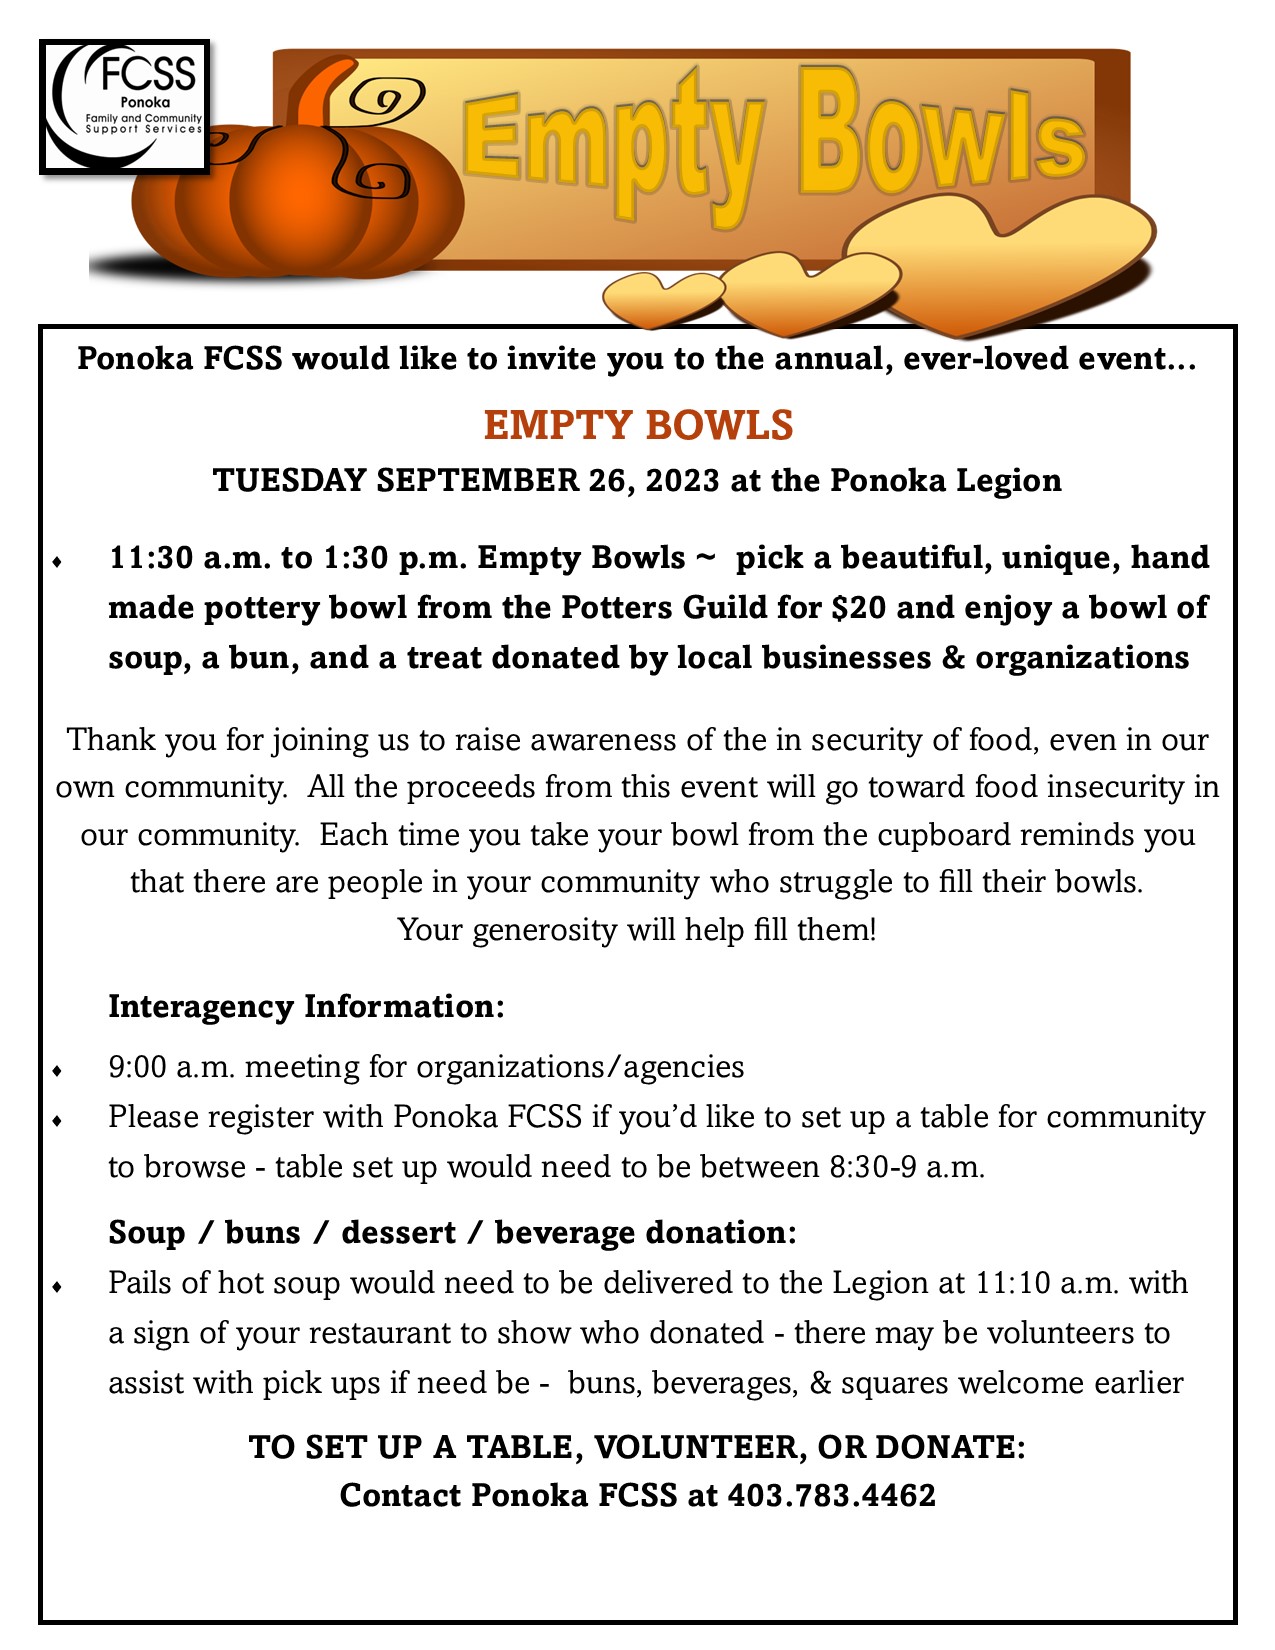 Empty Bowls Spetember 26. Call FCSS Office at 403-783-4462 for information.